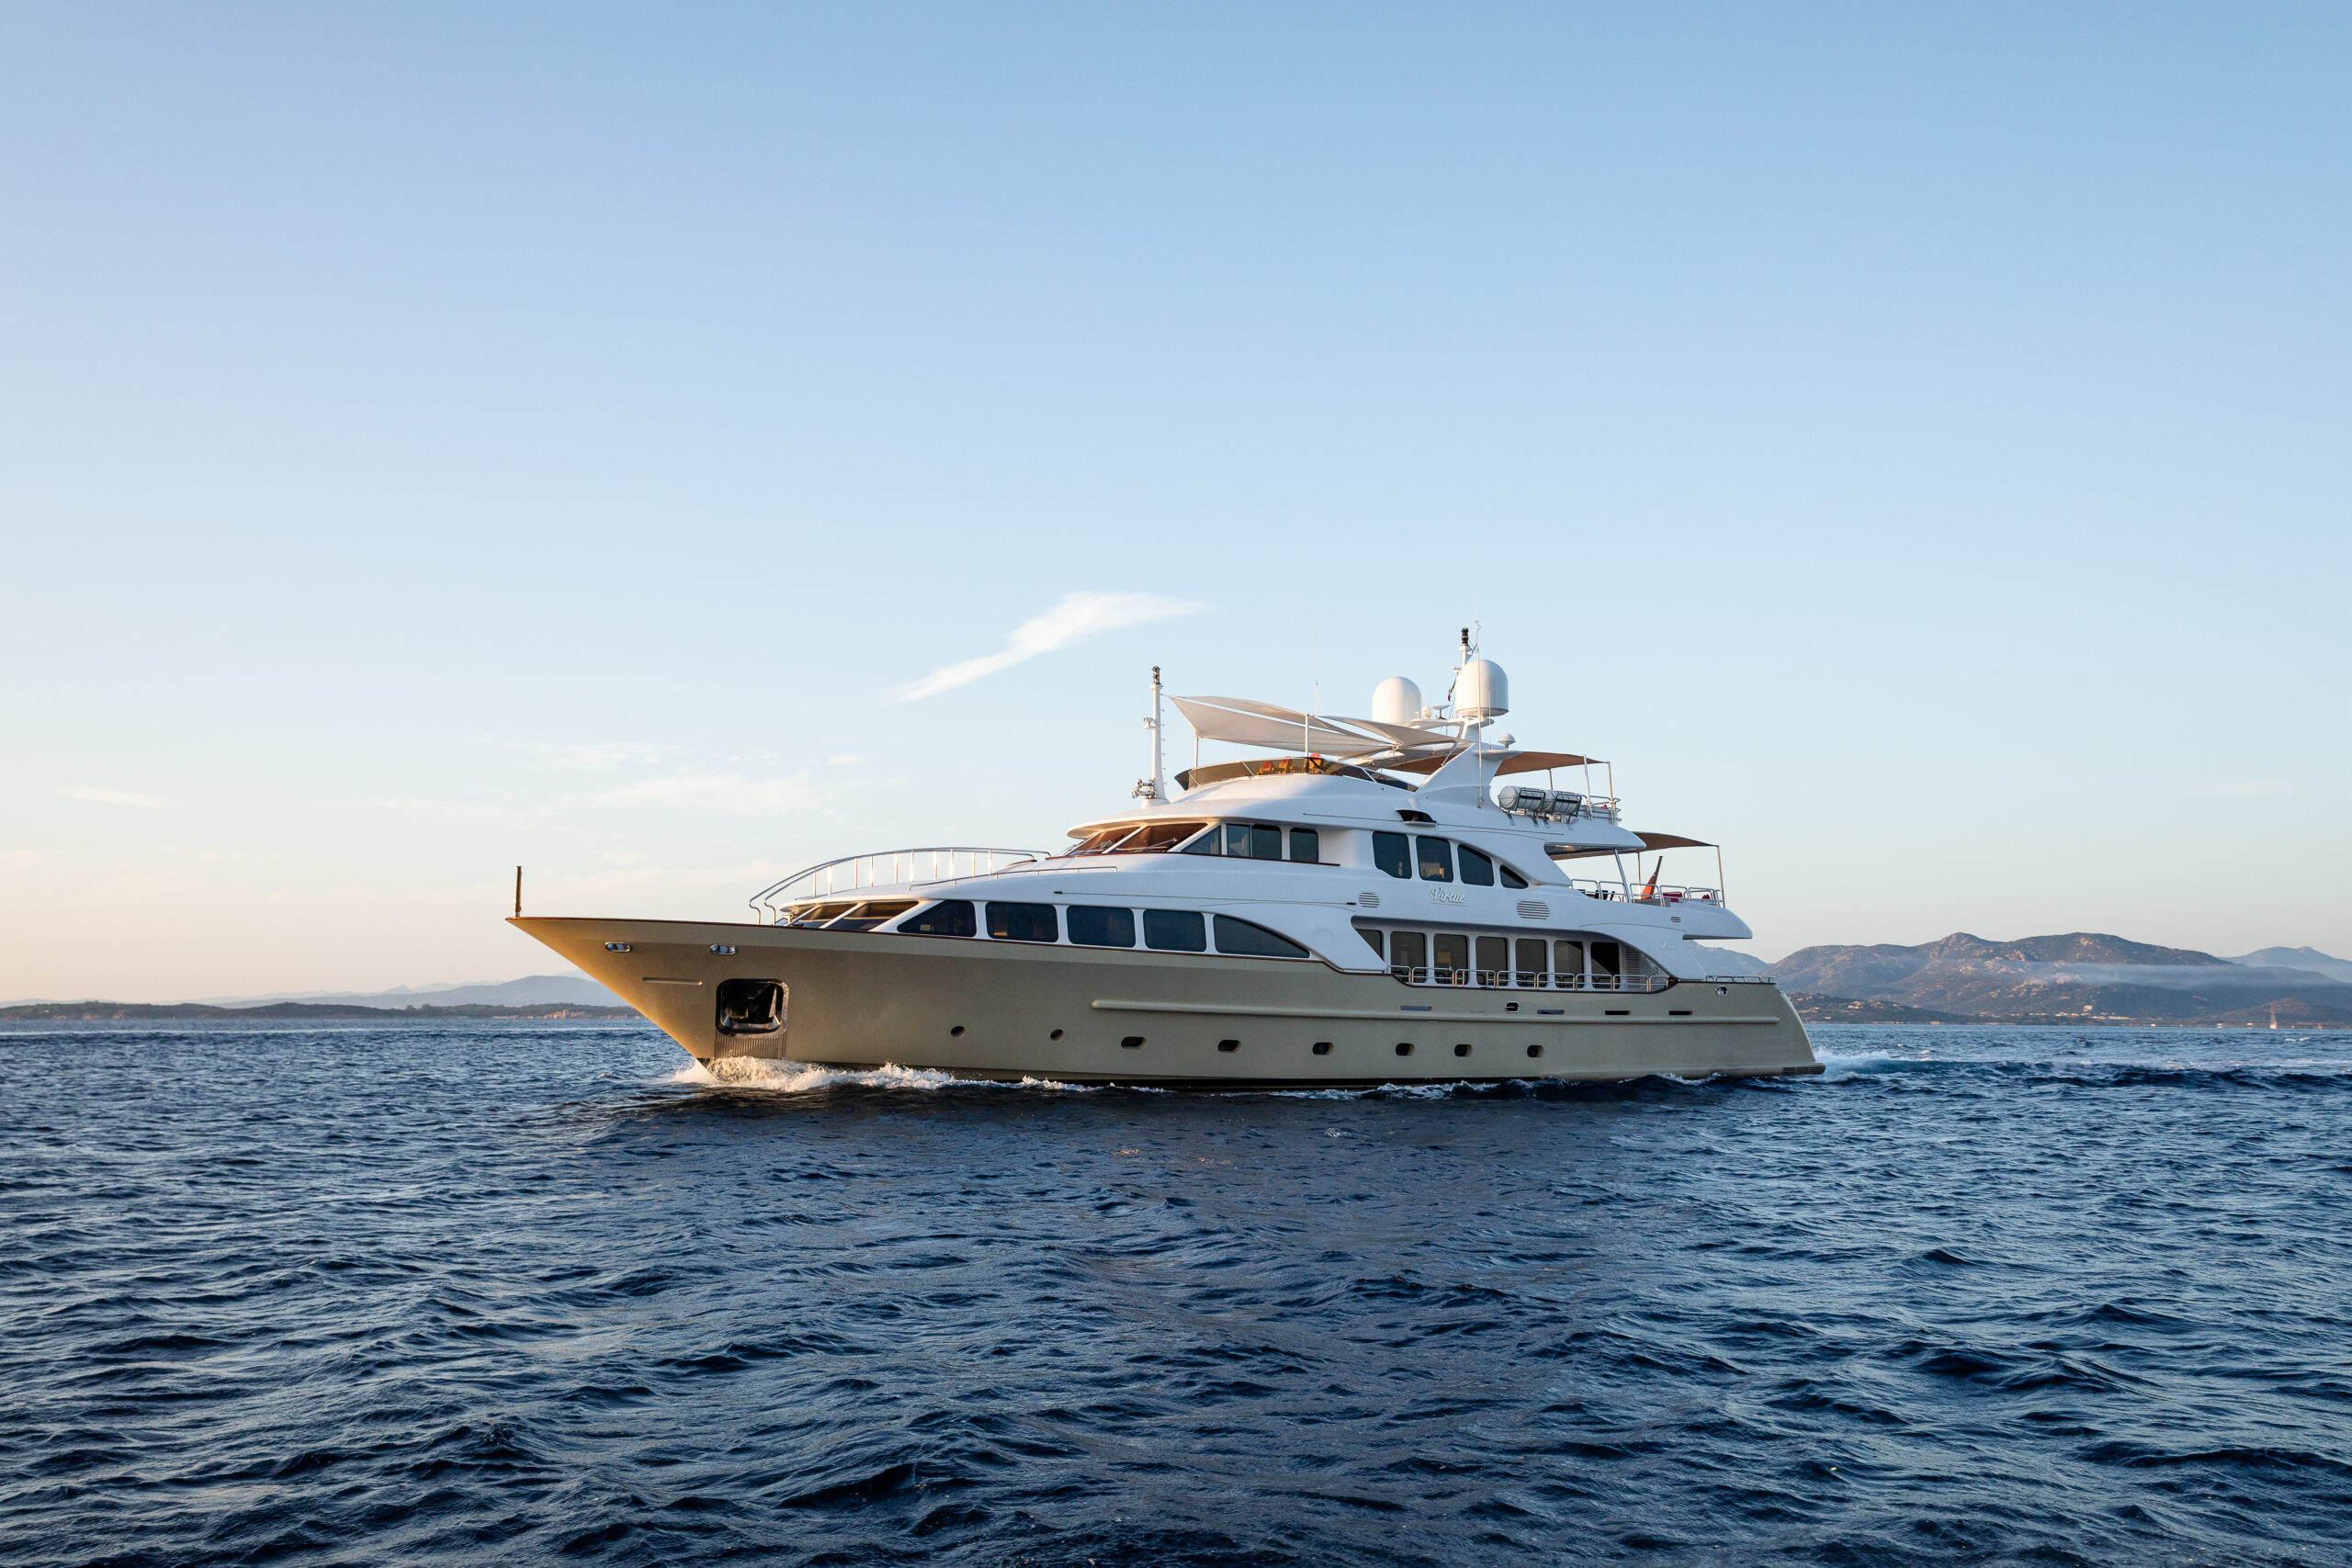 The VIRTUE offers yacht rental luxury and style